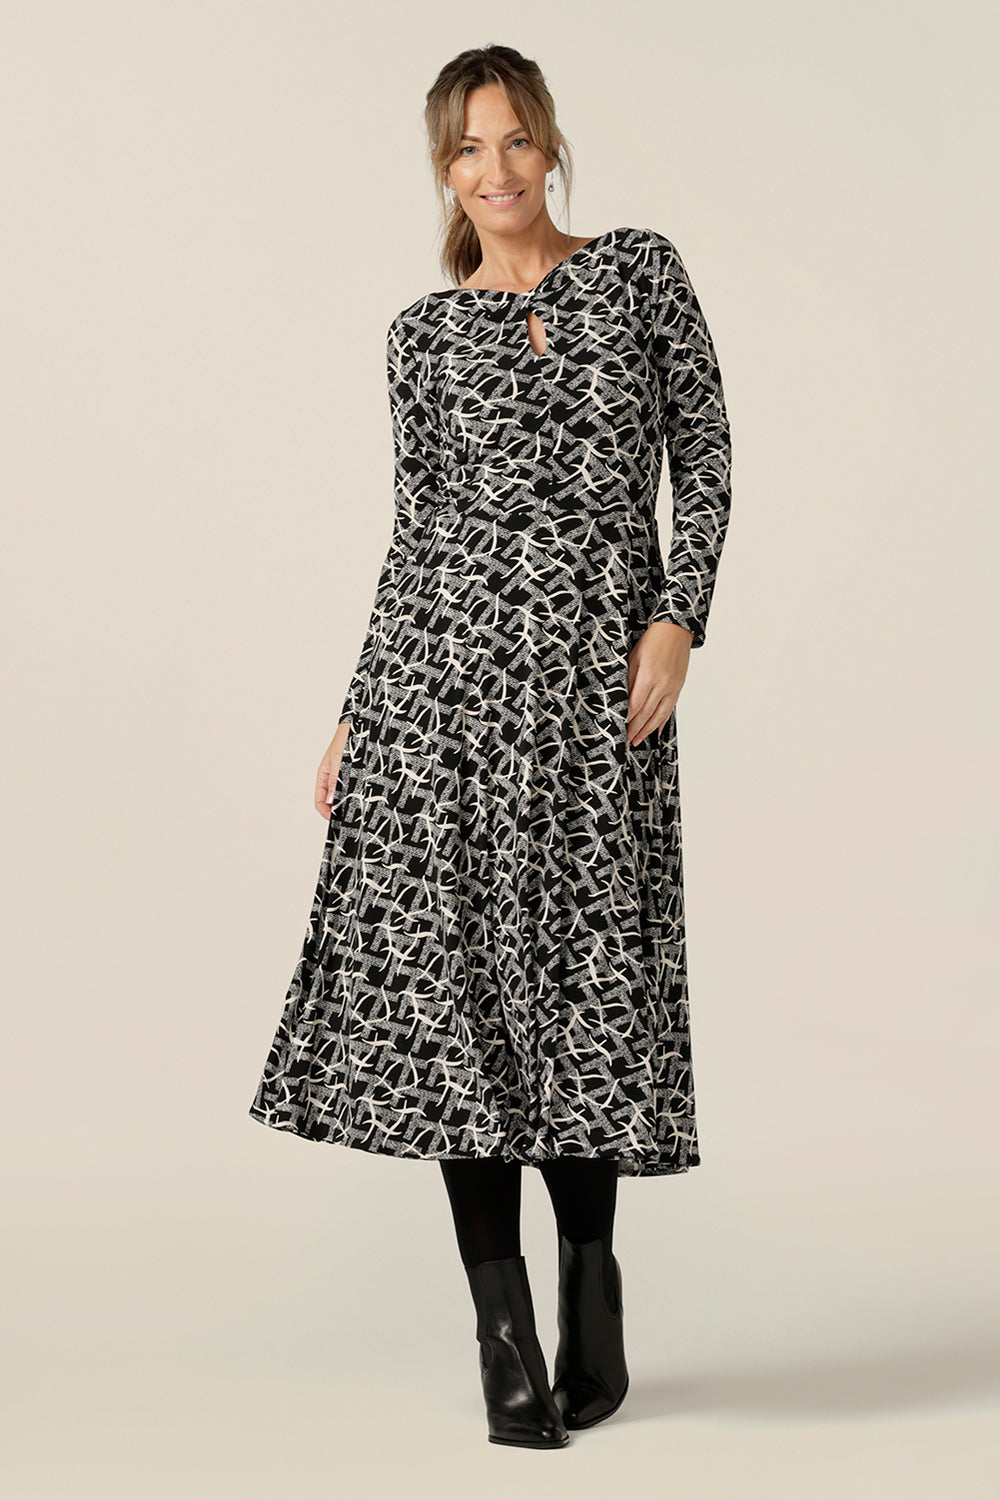 A size 10  woman wears a midi length, long sleeve dress with twisted keyhole detail. Made by Australian and New Zealand women's clothing label, L&F in an inclusive size range of sizes 8 to 24.